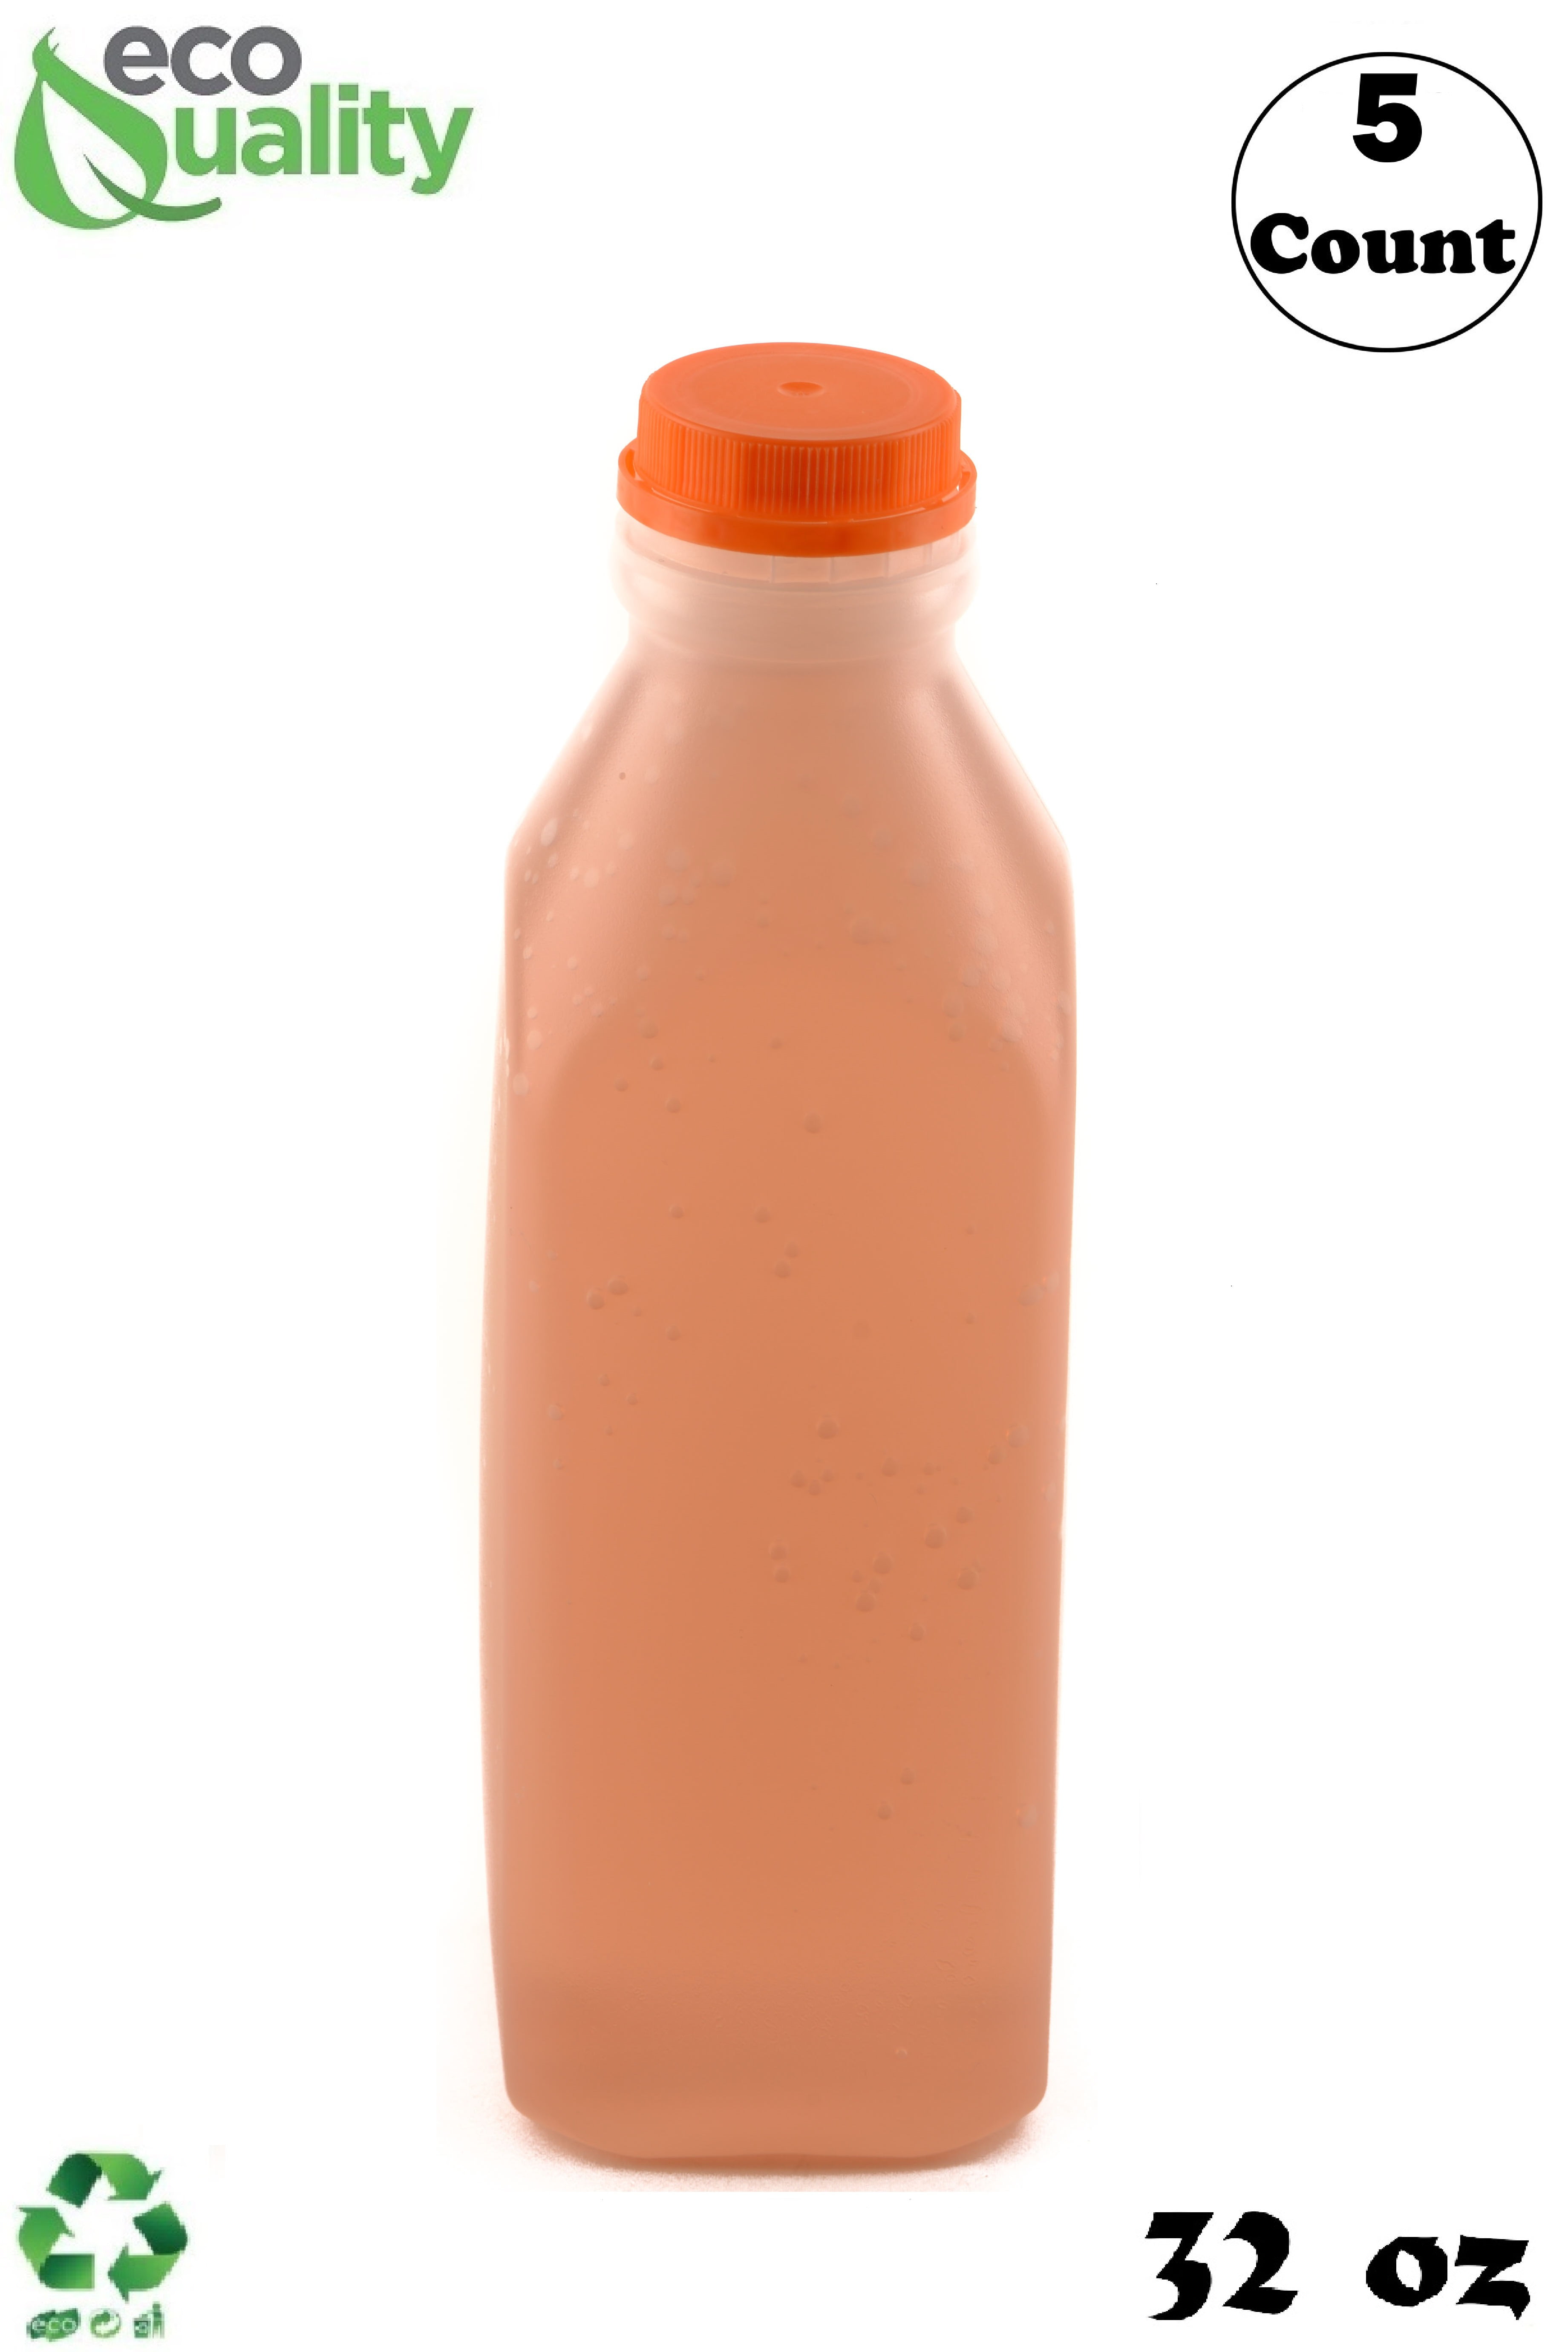 [40 PACK] Empty Plastic Gallon Juice Bottles with Tamper Evident Caps 128  OZ - Smoothie Bottles - Ideal for Juices, Milk, Smoothies, Picnic's and  even